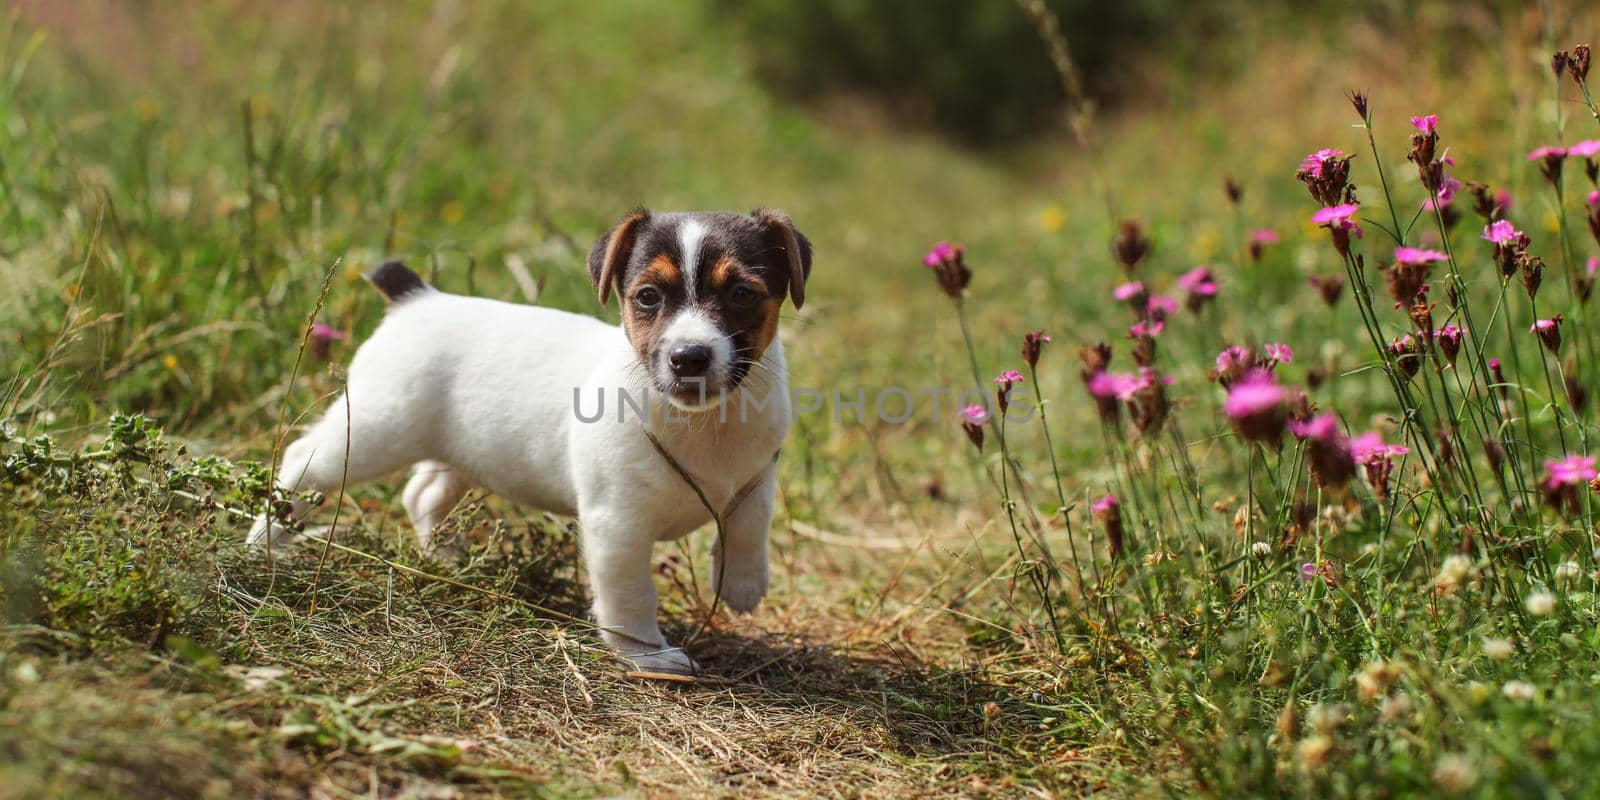 Two months old Jack Russell terrier puppy walking in grass, pink carnation flowers next to her, lit by sun.